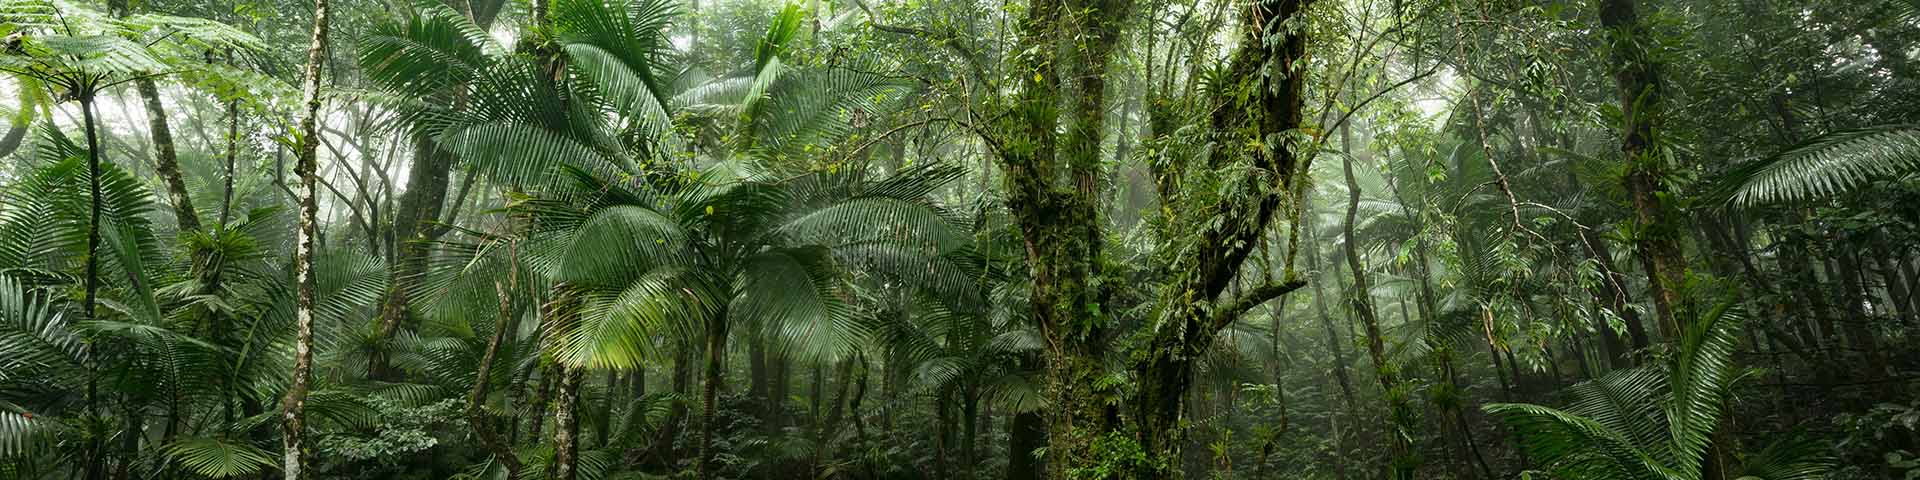 Green jungle scene from the rainforest Yunque on the Caribbean island Puerto Rico